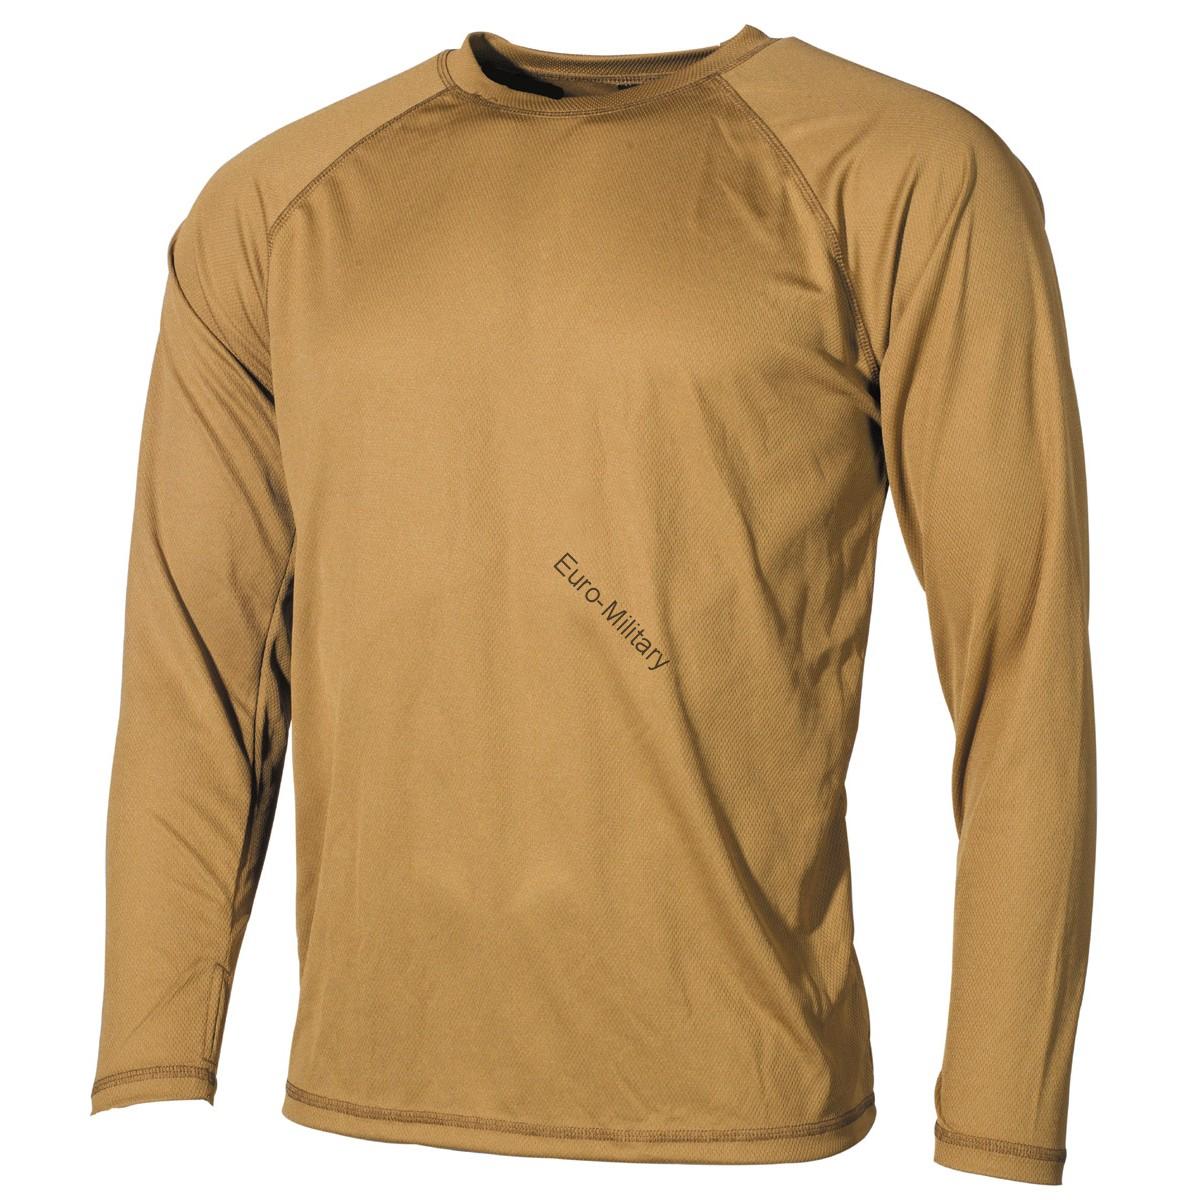 Military/Outdoor Undershirt Level 1 Gen.3 Lightweight and Quick Drying - Coyote